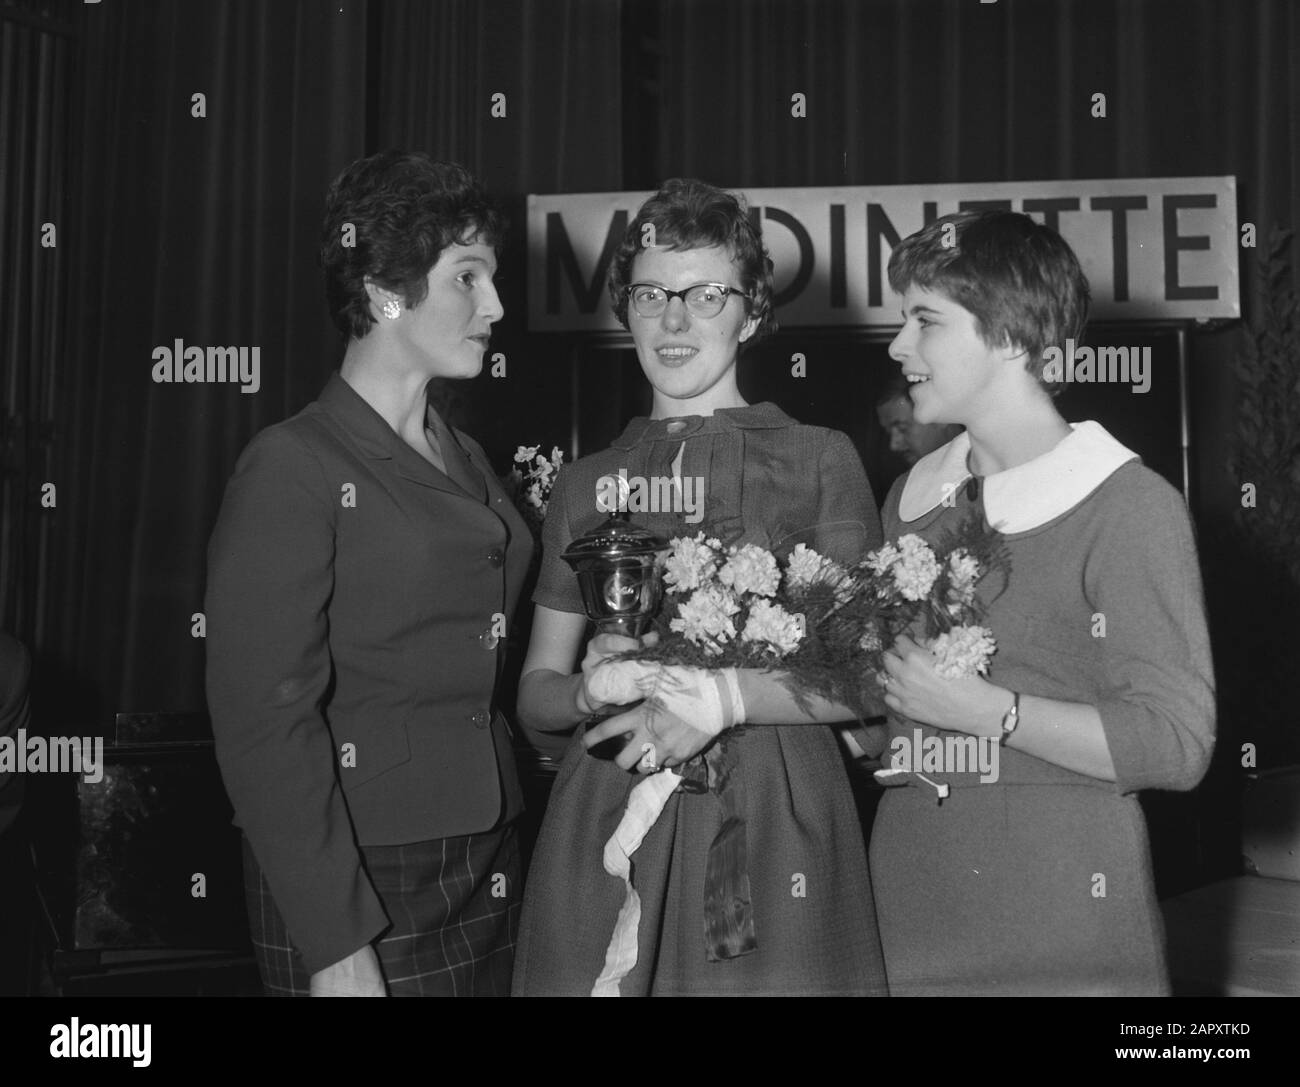 Election modinette 59 in Amsterdam, v.l.n.r. Mies Bouwman, Annie Heerholz (winn.) and Rietje van Bunningen (2nd) Date: February 2, 1959 Location: Amsterdam, Noord-Holland Keywords: Elections Personal Name: Bouwman, Mies Stock Photo